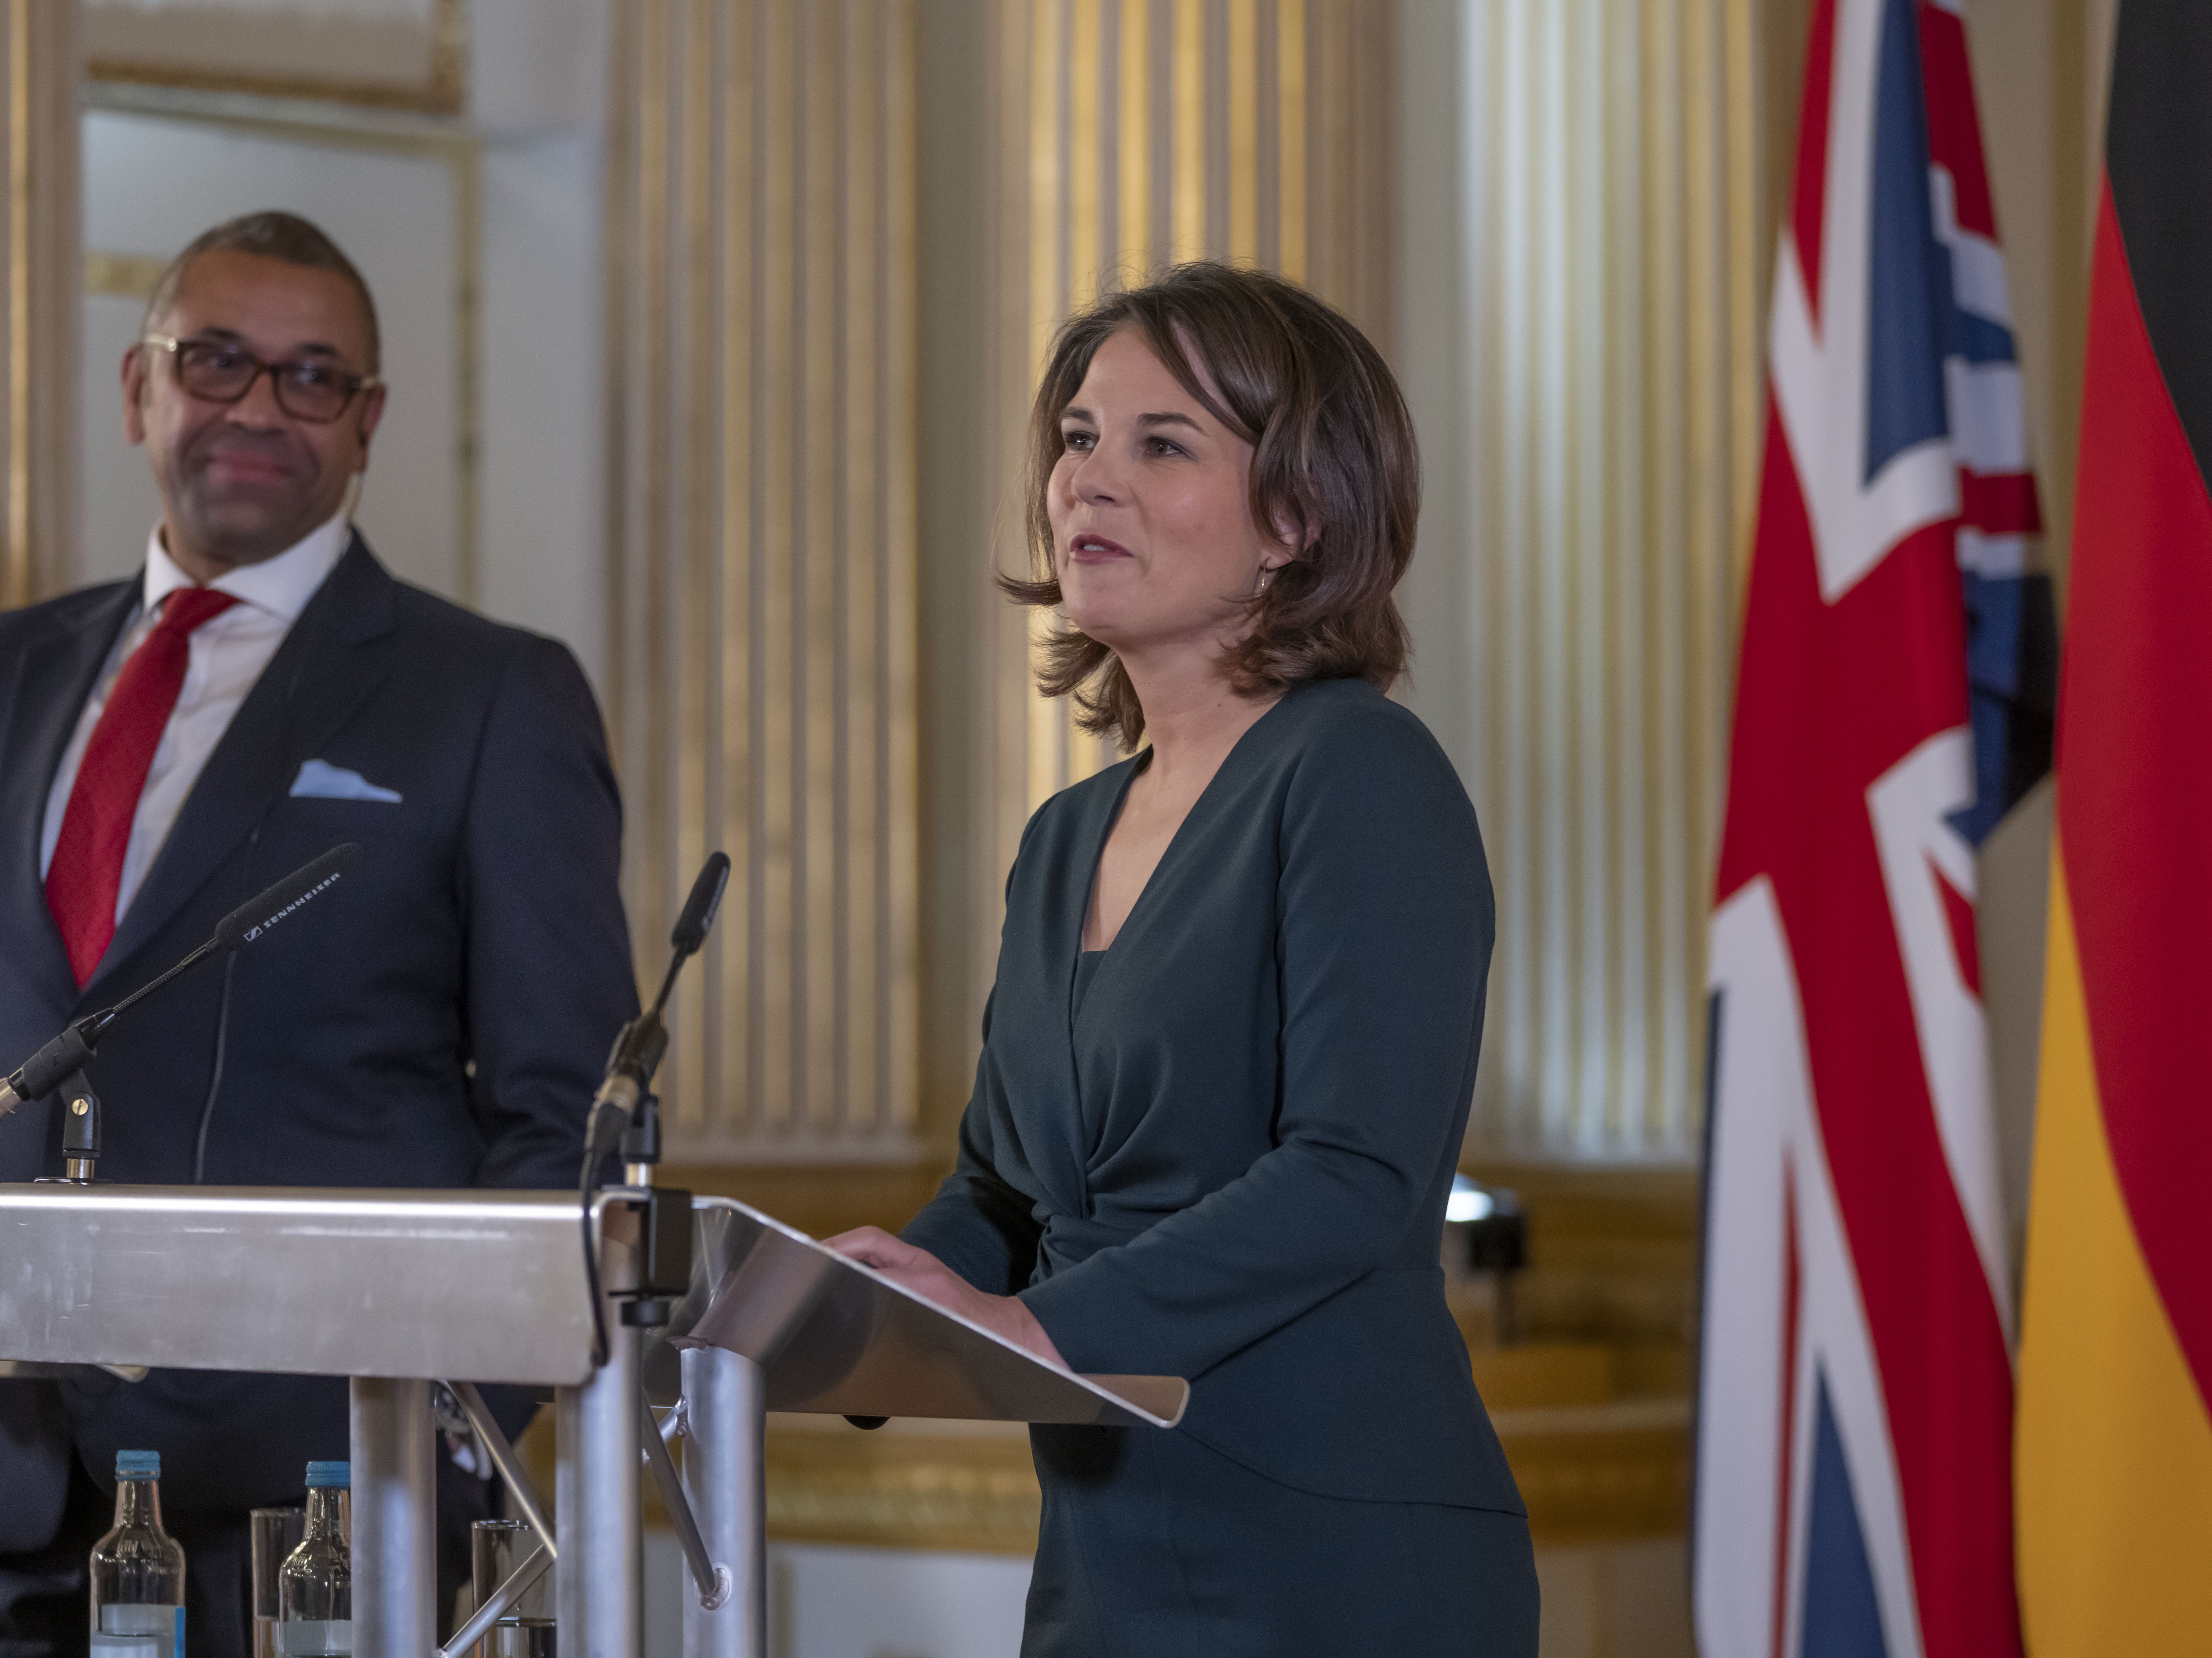 Foreign secretary James Cleverly and German foreign minister Annalena Baerbock